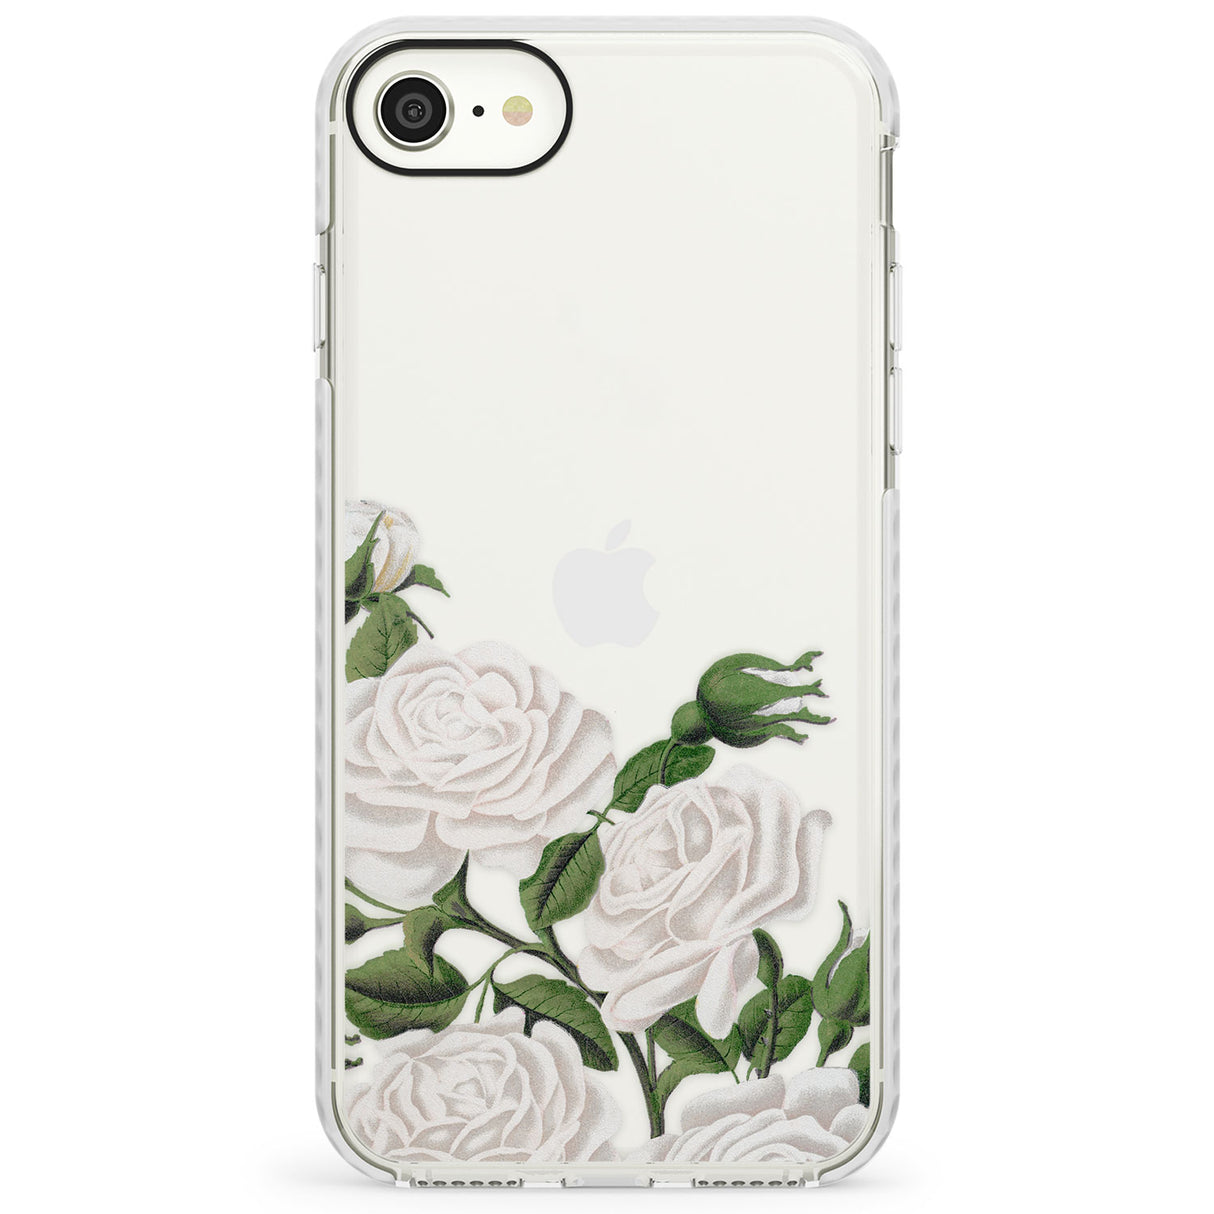 White Vintage Painted FlowersImpact Phone Case for iPhone SE